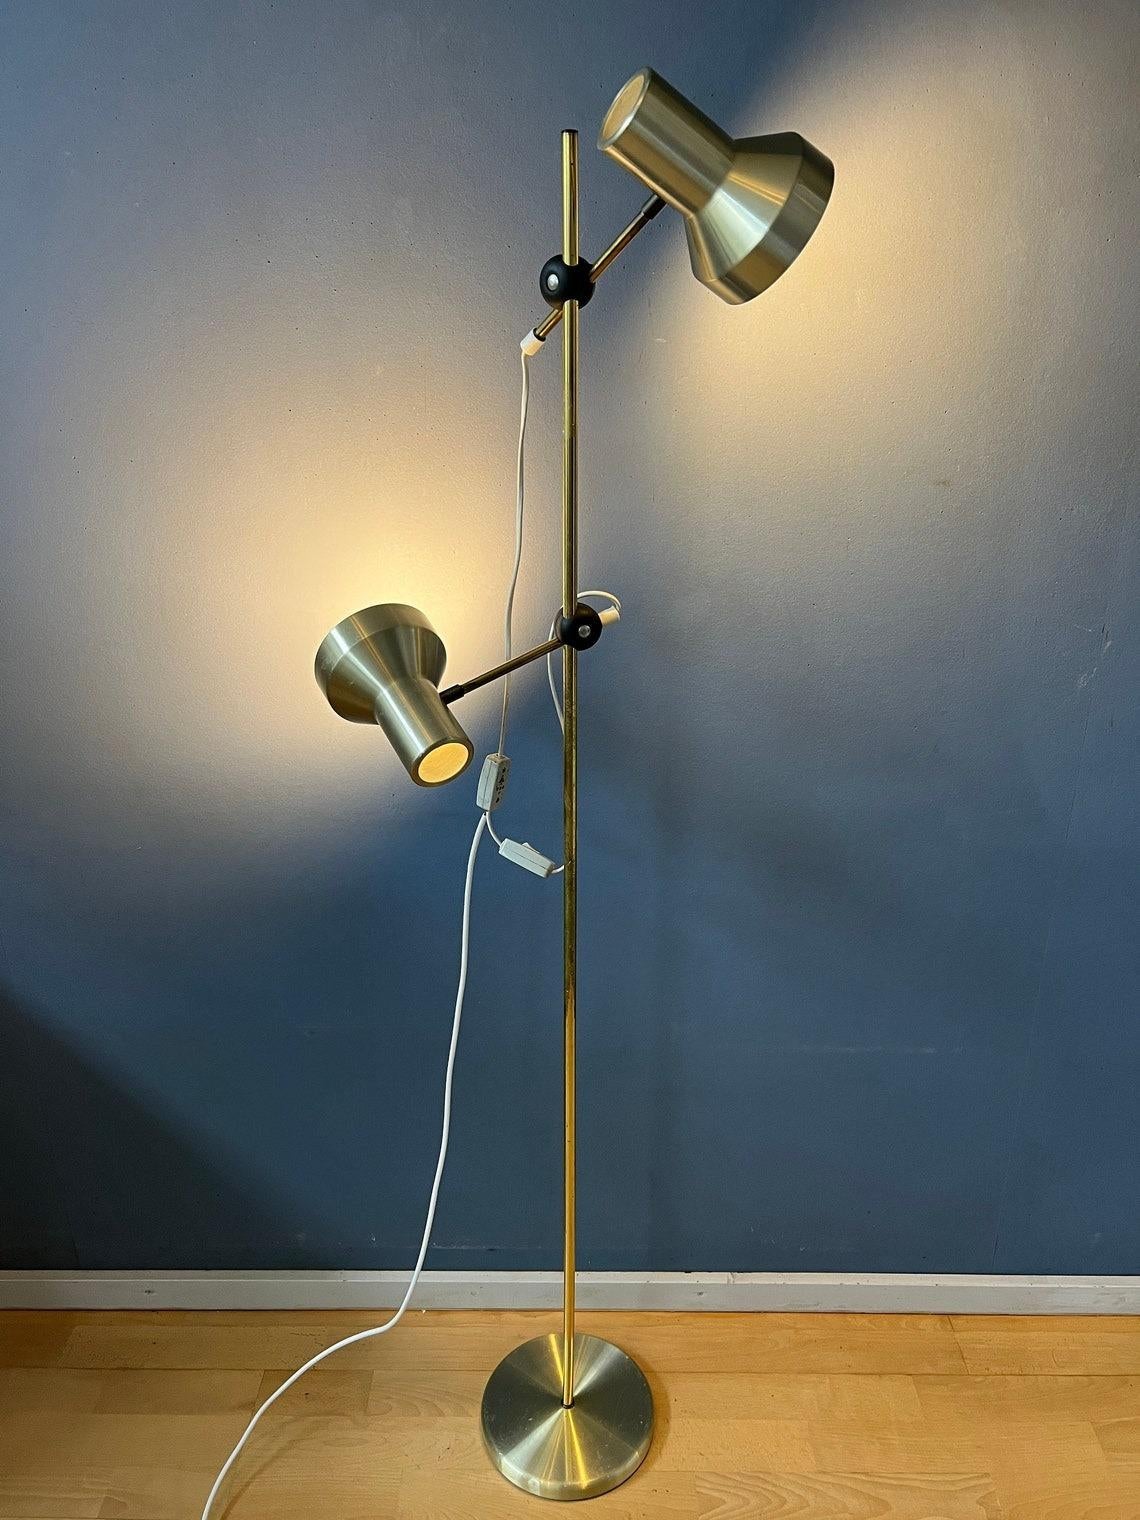 A vintage space age floor lamp with two aluminium spots in silver/gold colour.. The spots (and their arms) can be turned in any direction desirable and move up and down the base. The spots can be switched on simultaneously or separately. The lamp